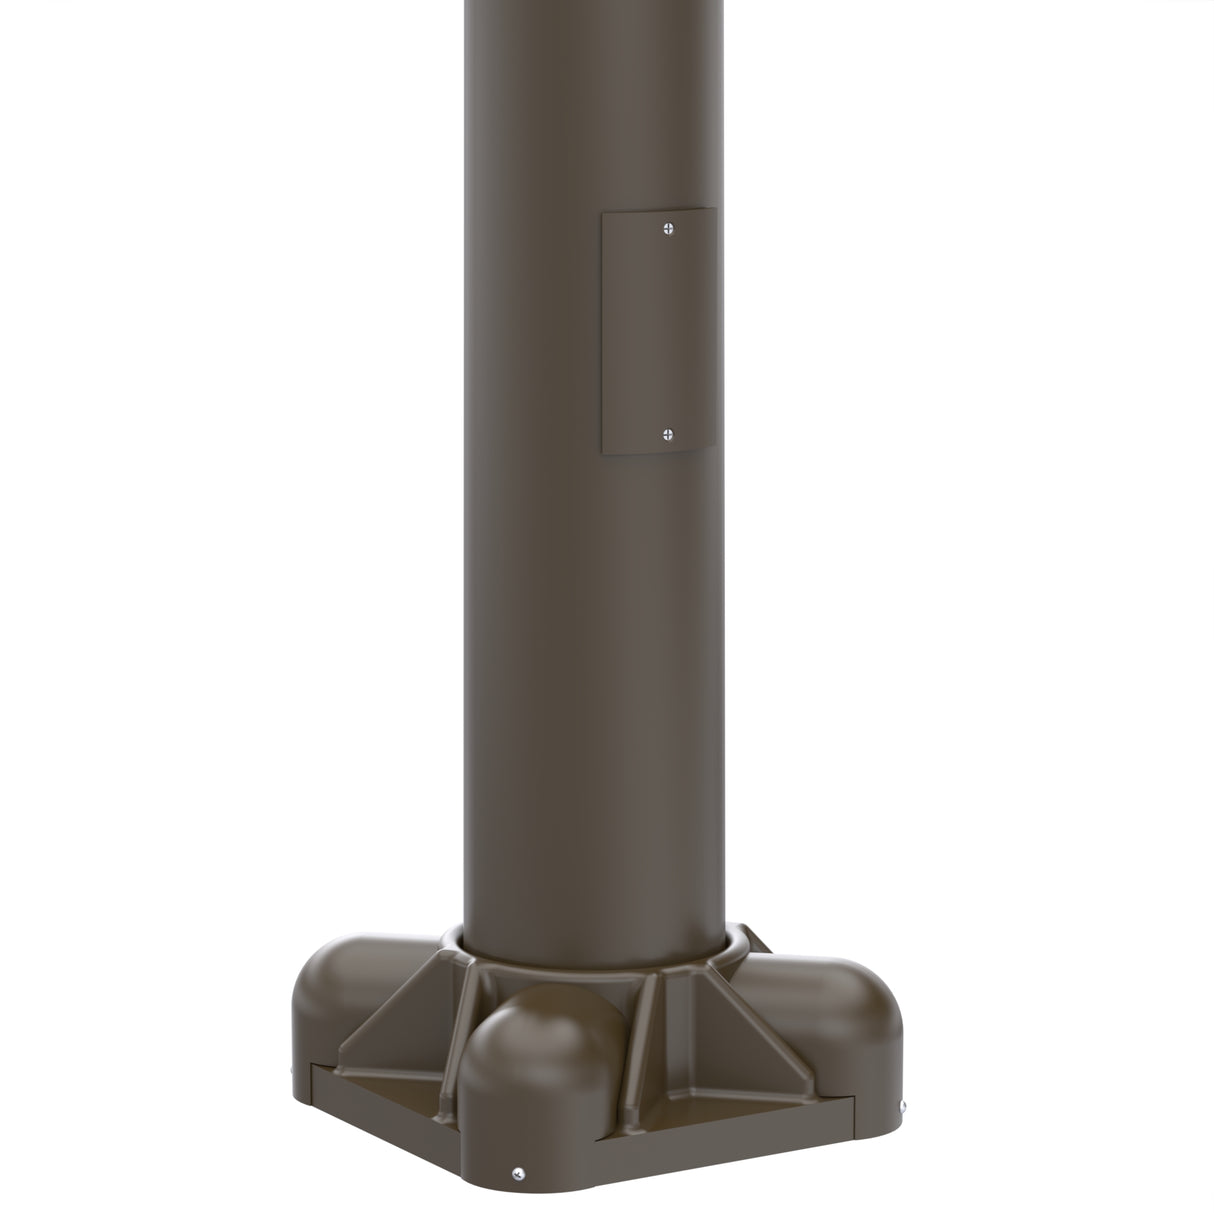 23' Tall x 6.0" Base OD x 4.0" Top OD x 0.156" Thick, Round Tapered Aluminum, Anchor Base Light Pole